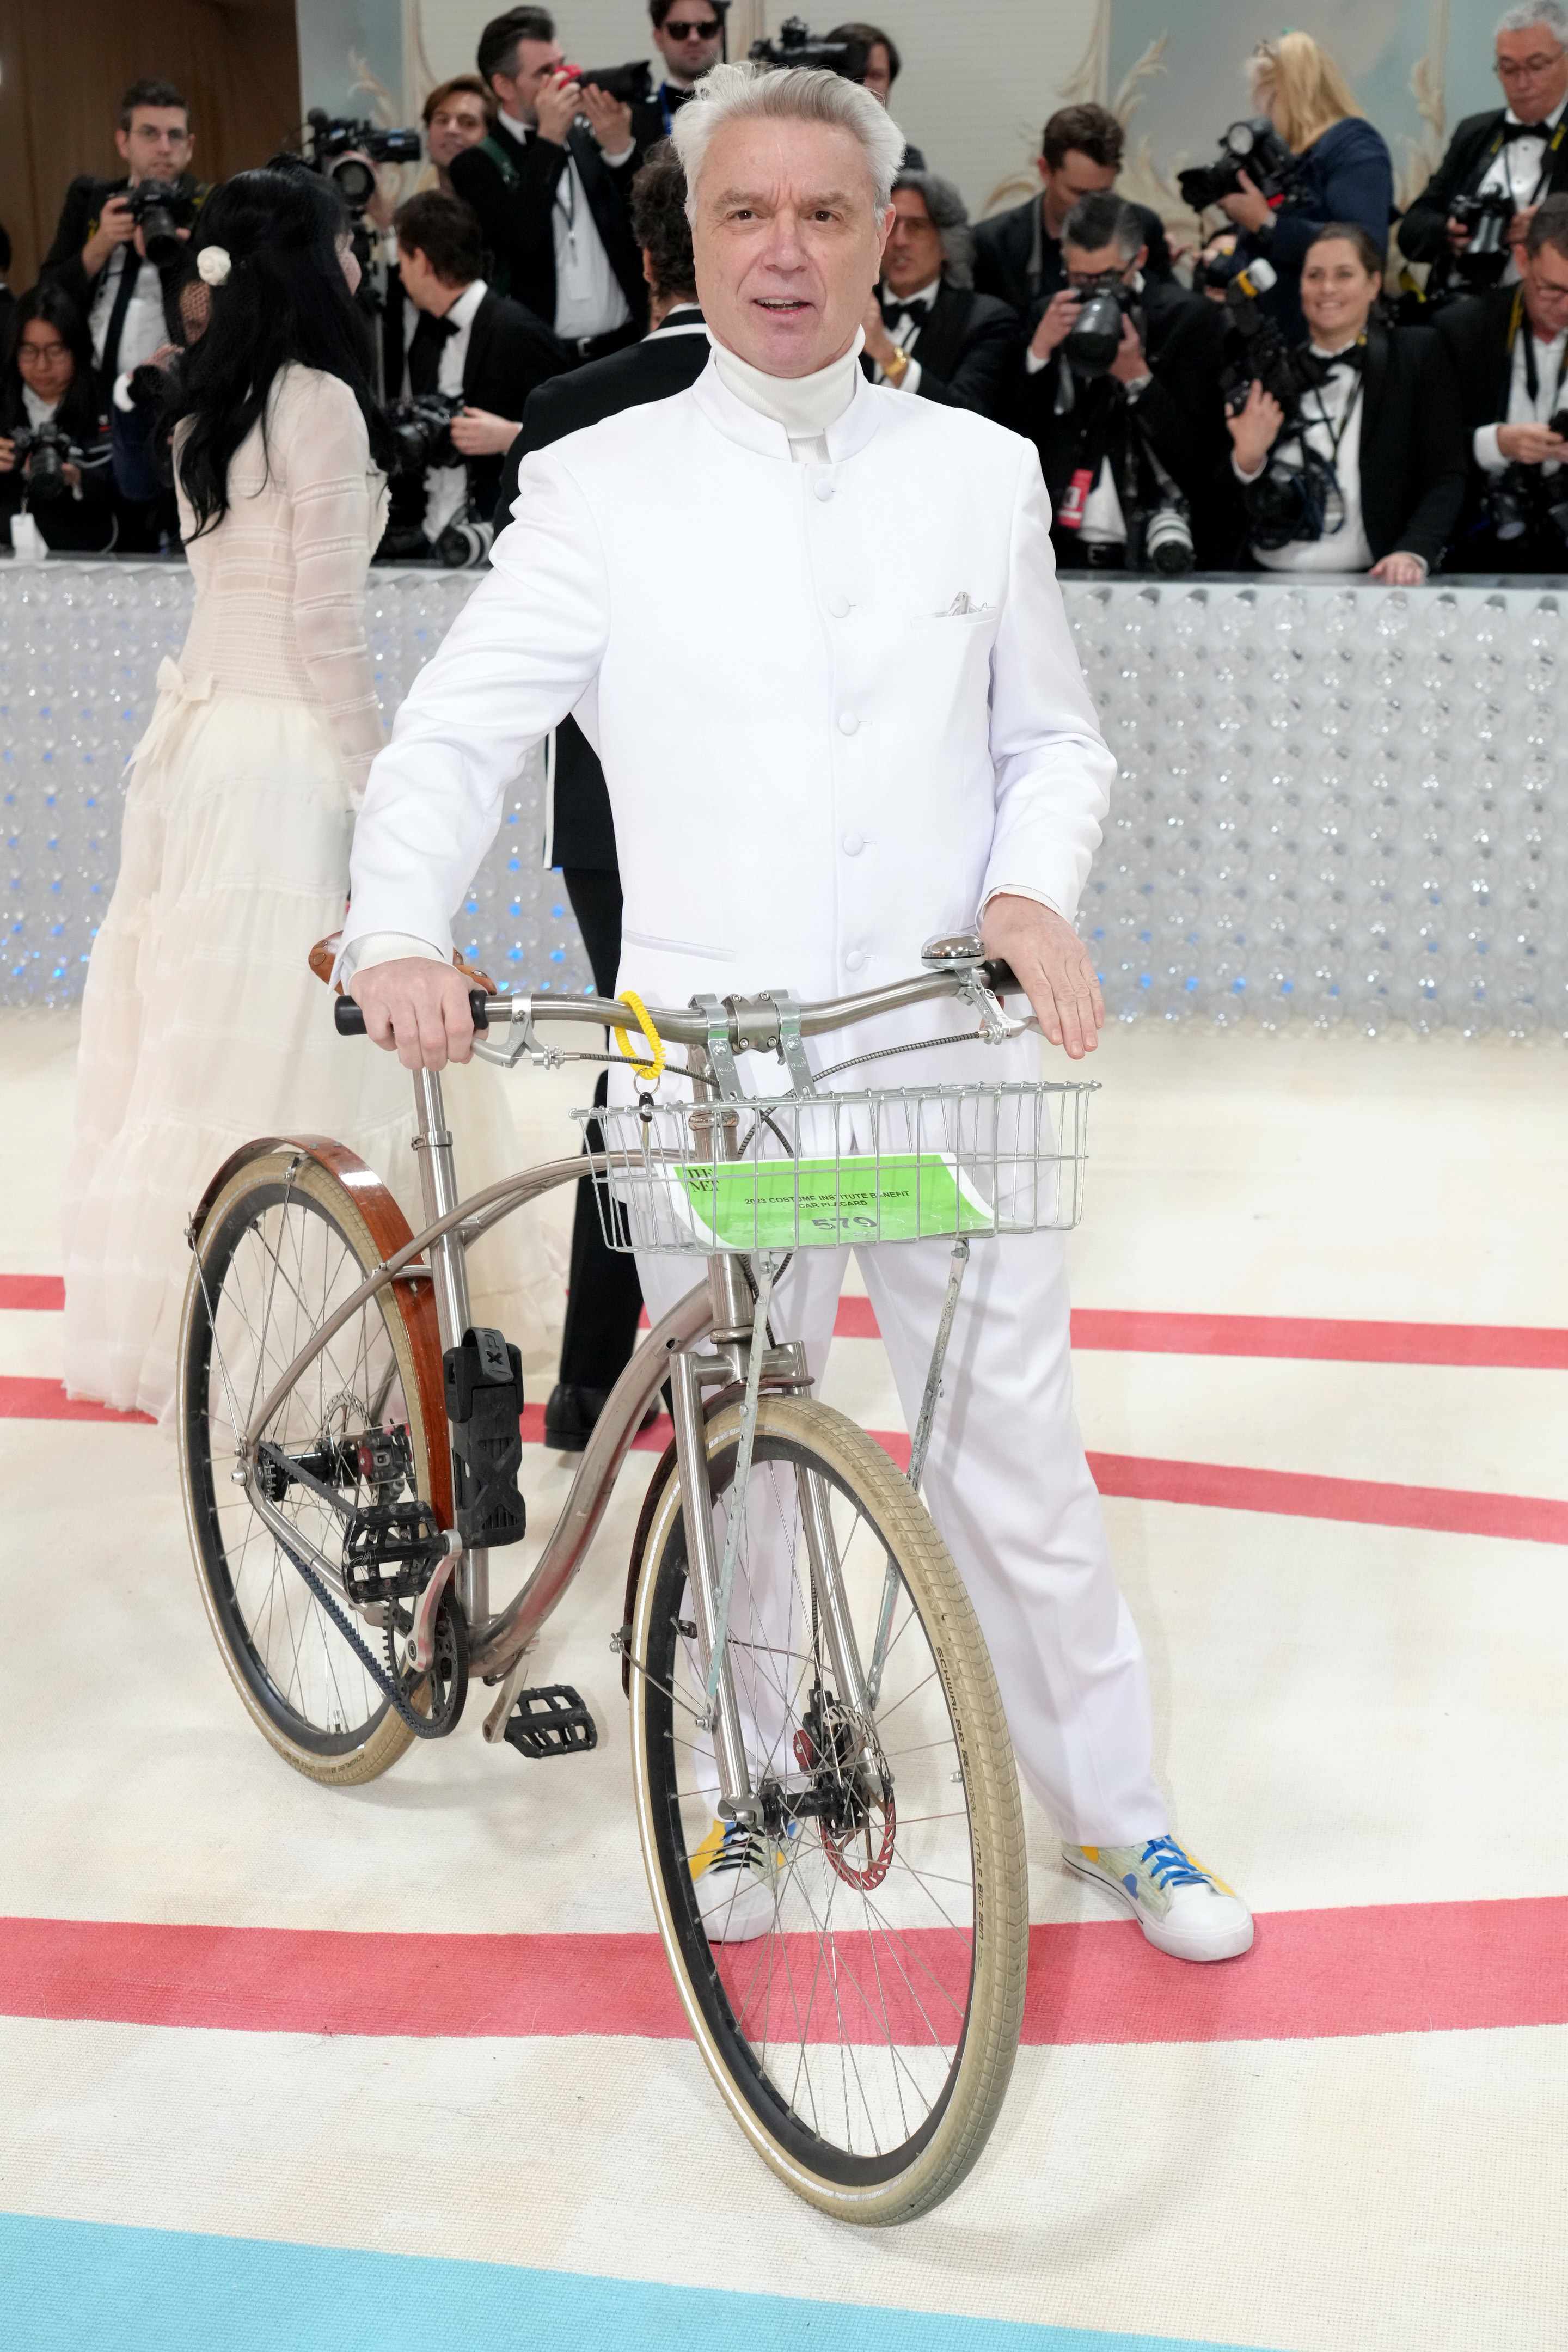 David Byrne wearing an all-white suite, sneakers, and holding a bike on the red carpet